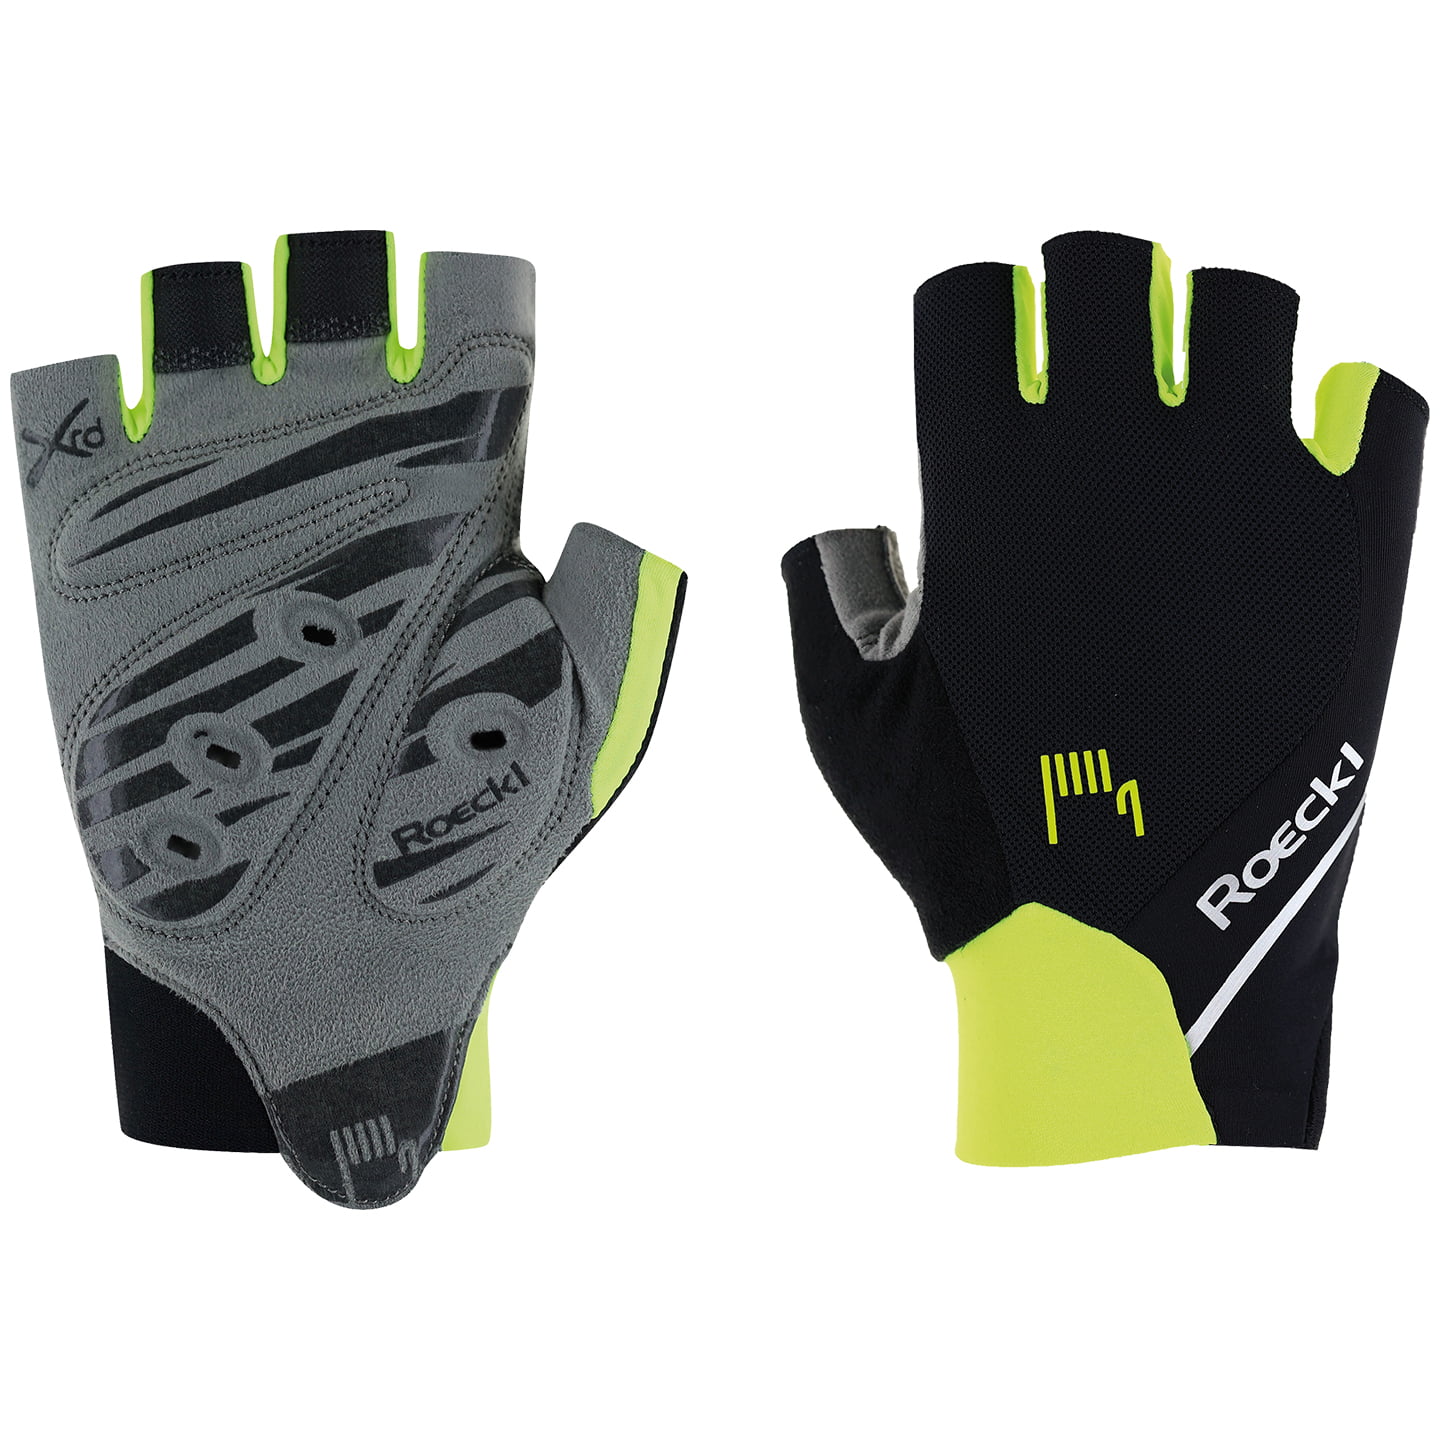 ROECKL Mori Full Finger Gloves, for men, size 10, Cycle gloves, Cycle wear